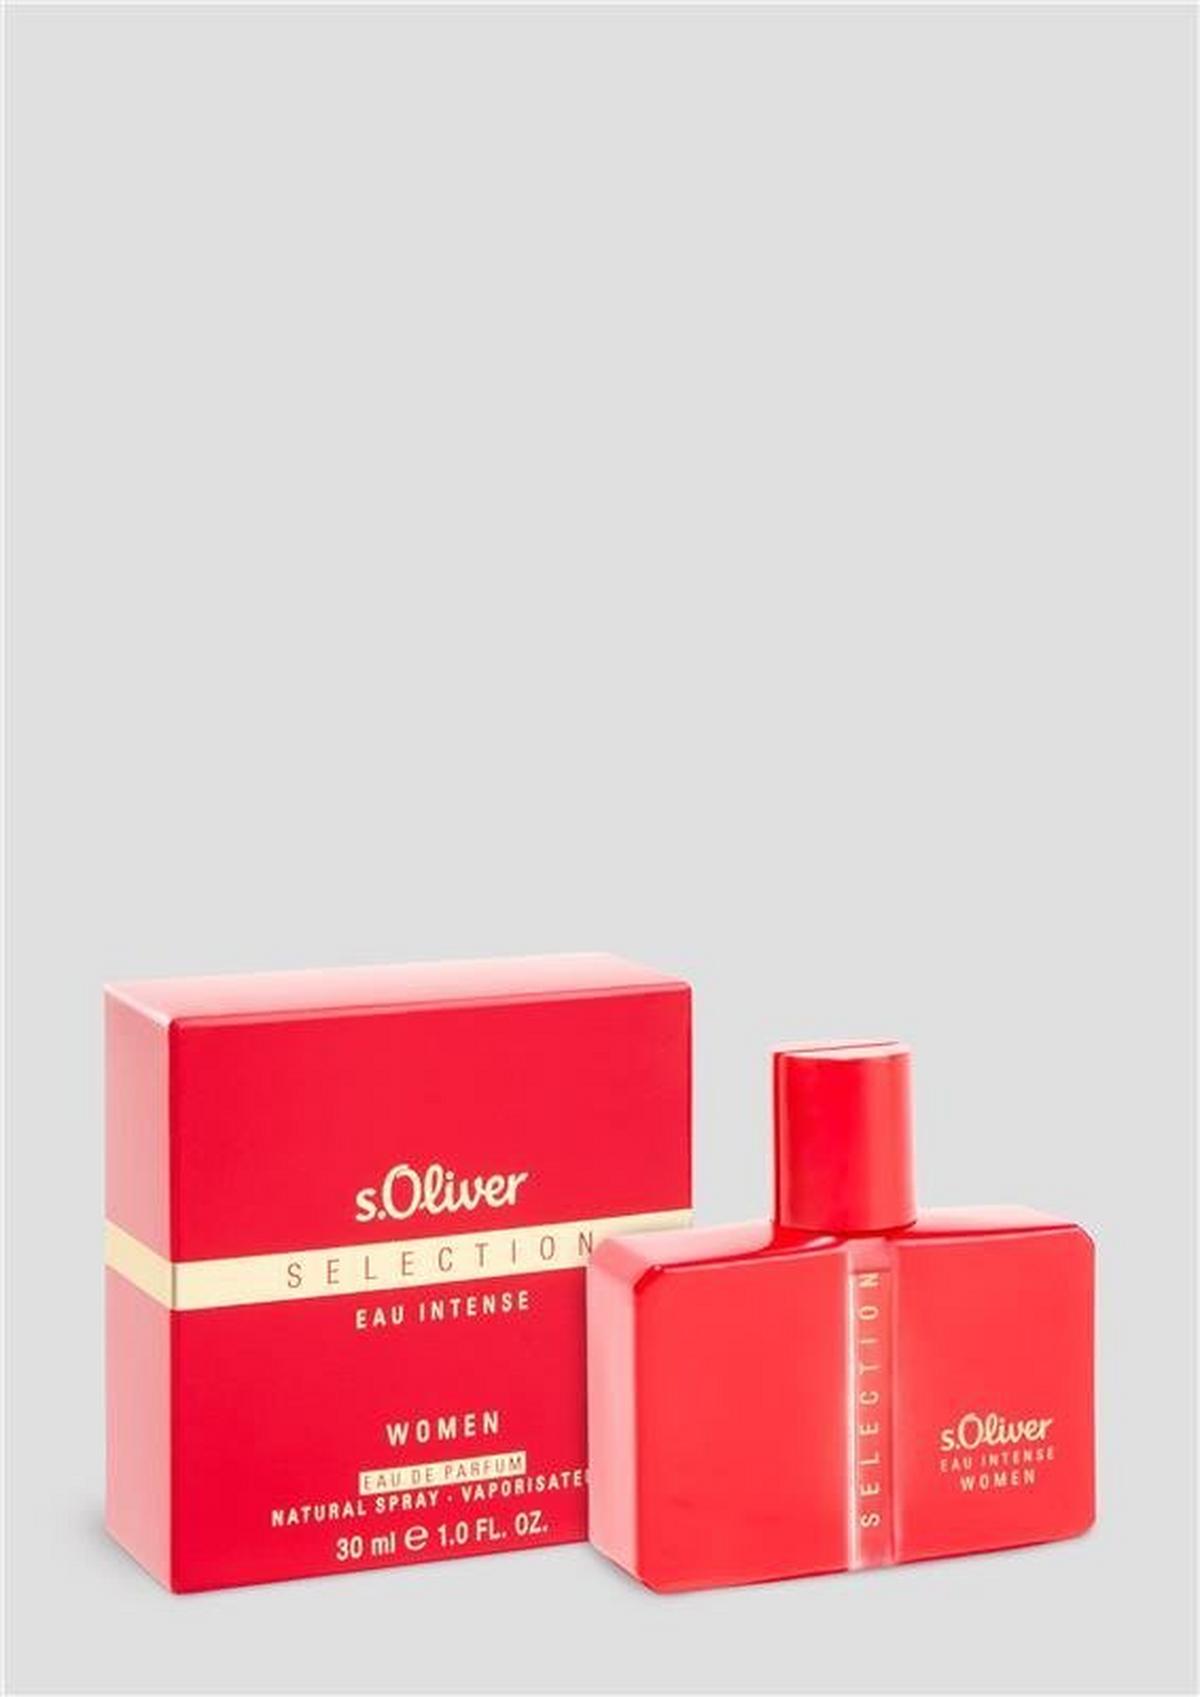 Selection Eau Intense Woman s.Oliver perfume - a new fragrance for